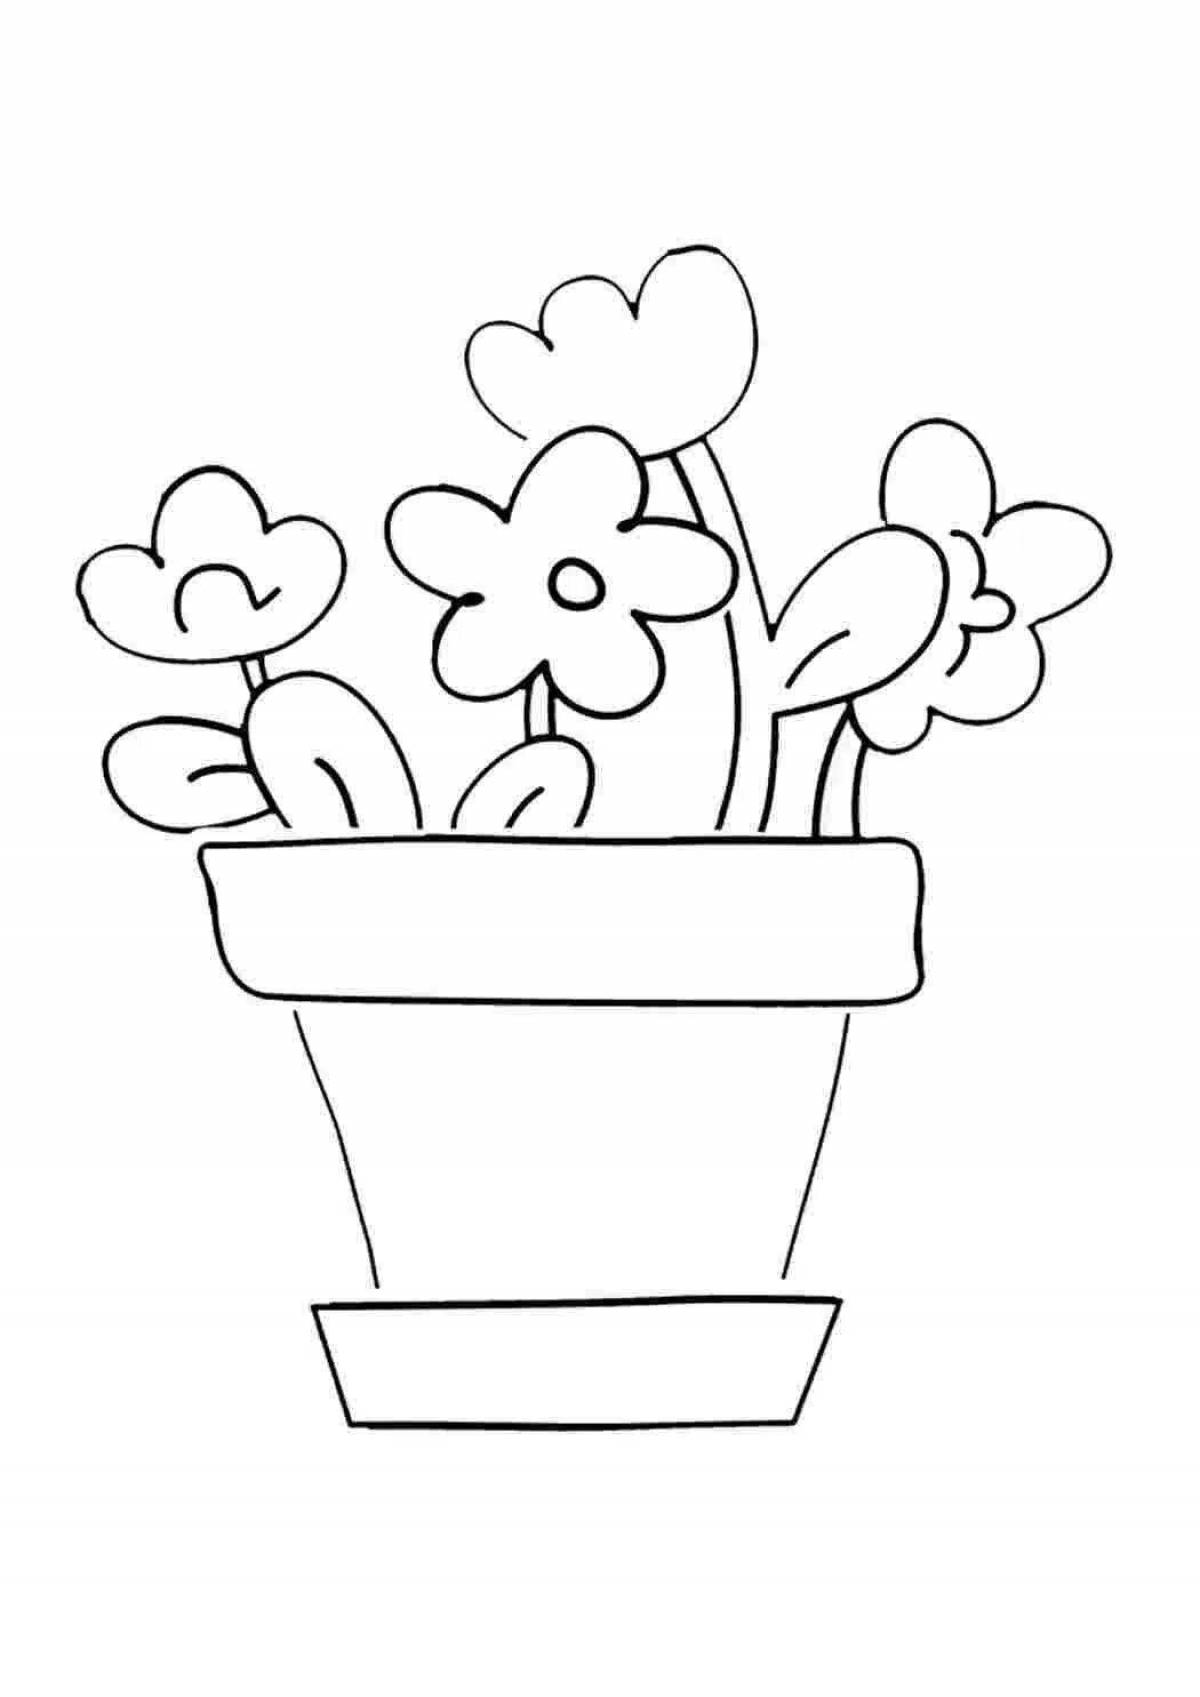 Coloring page wild flowerpot for kids